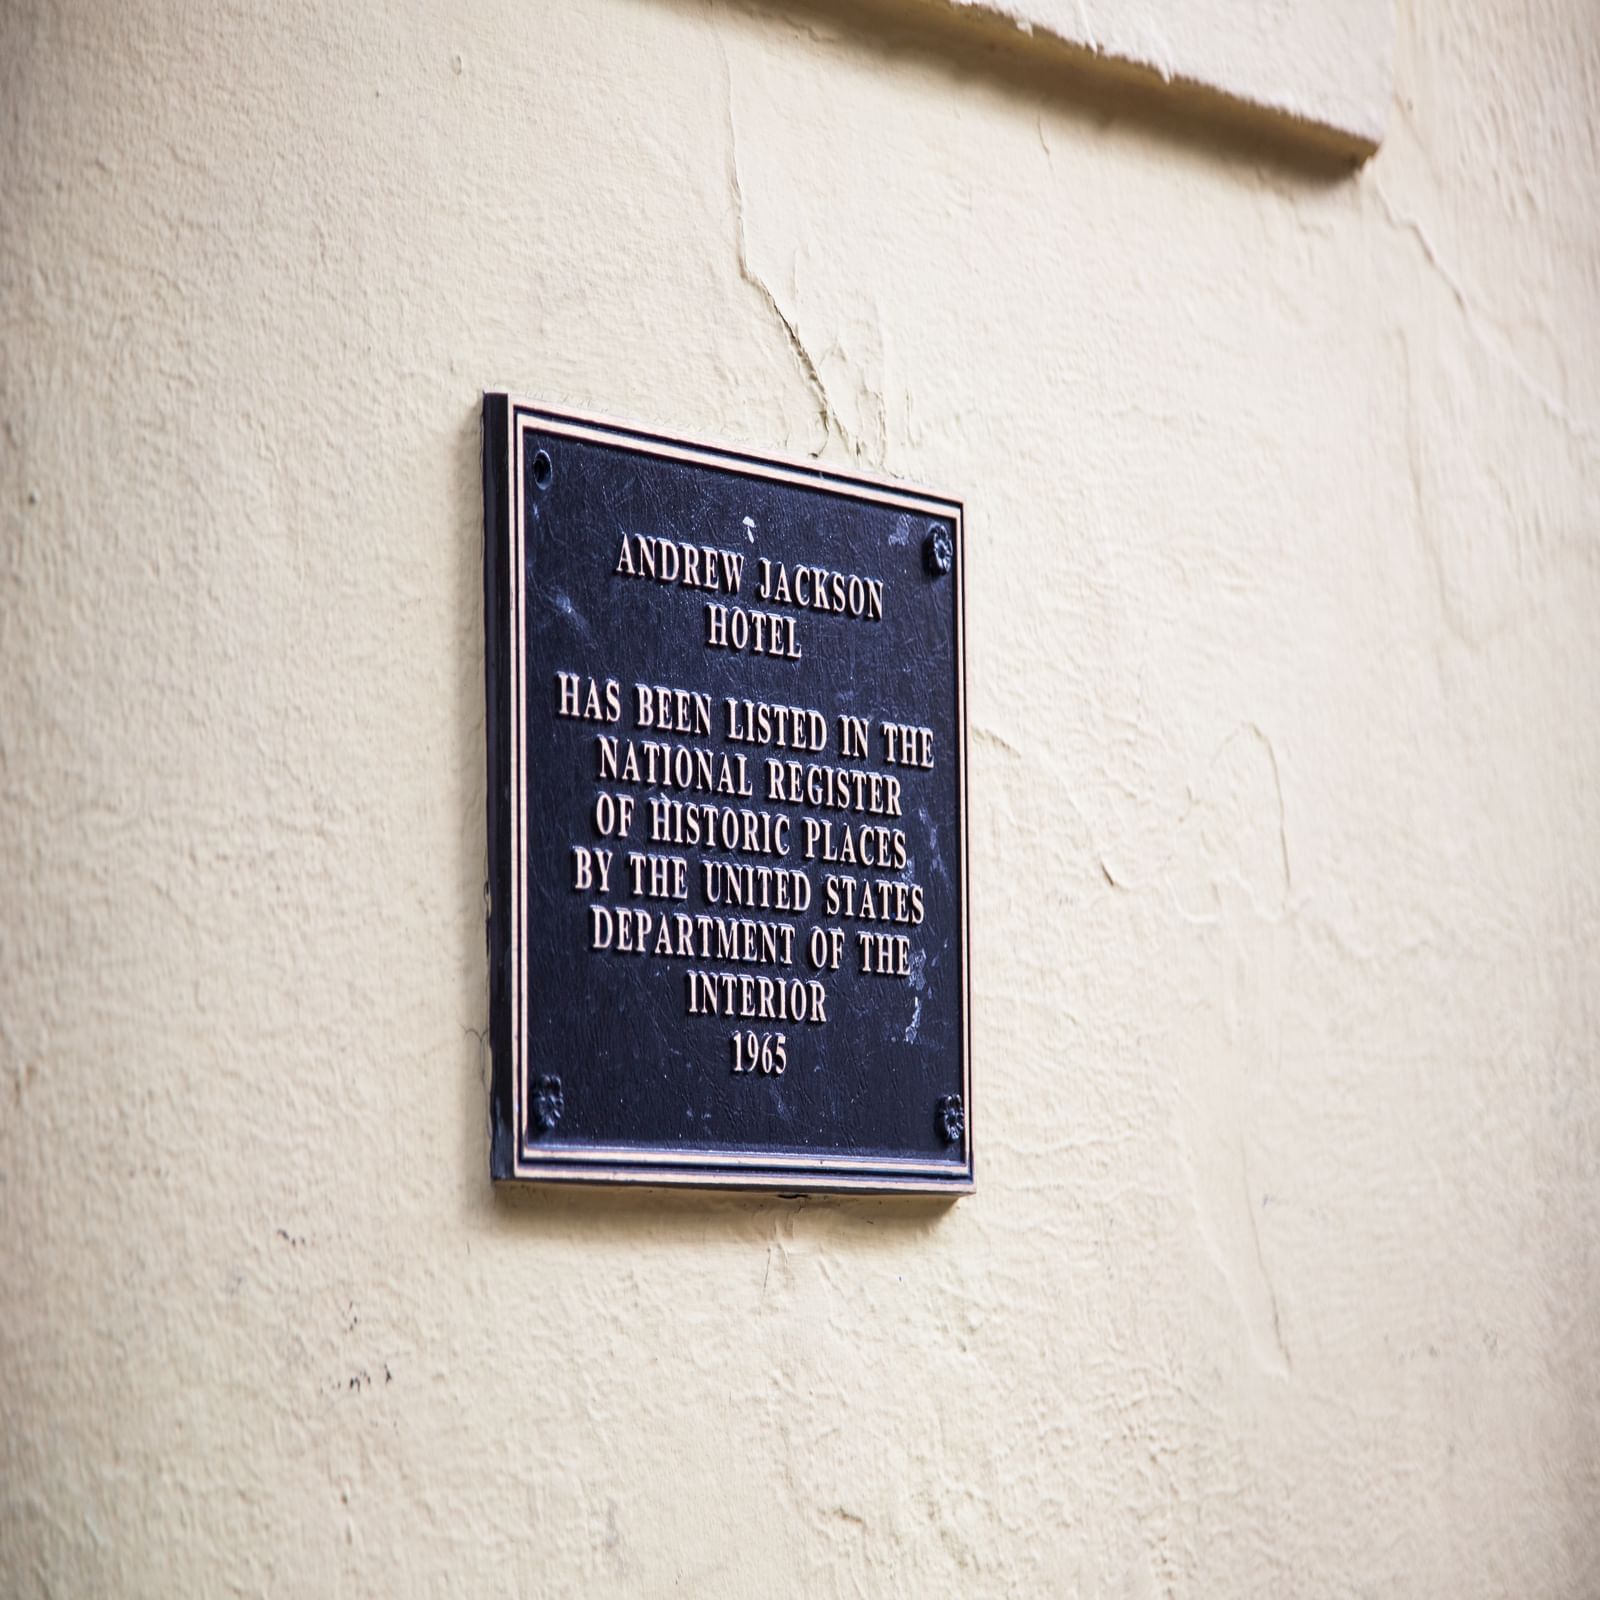 Plaque at the entrance of Andrew Jackson Hotel